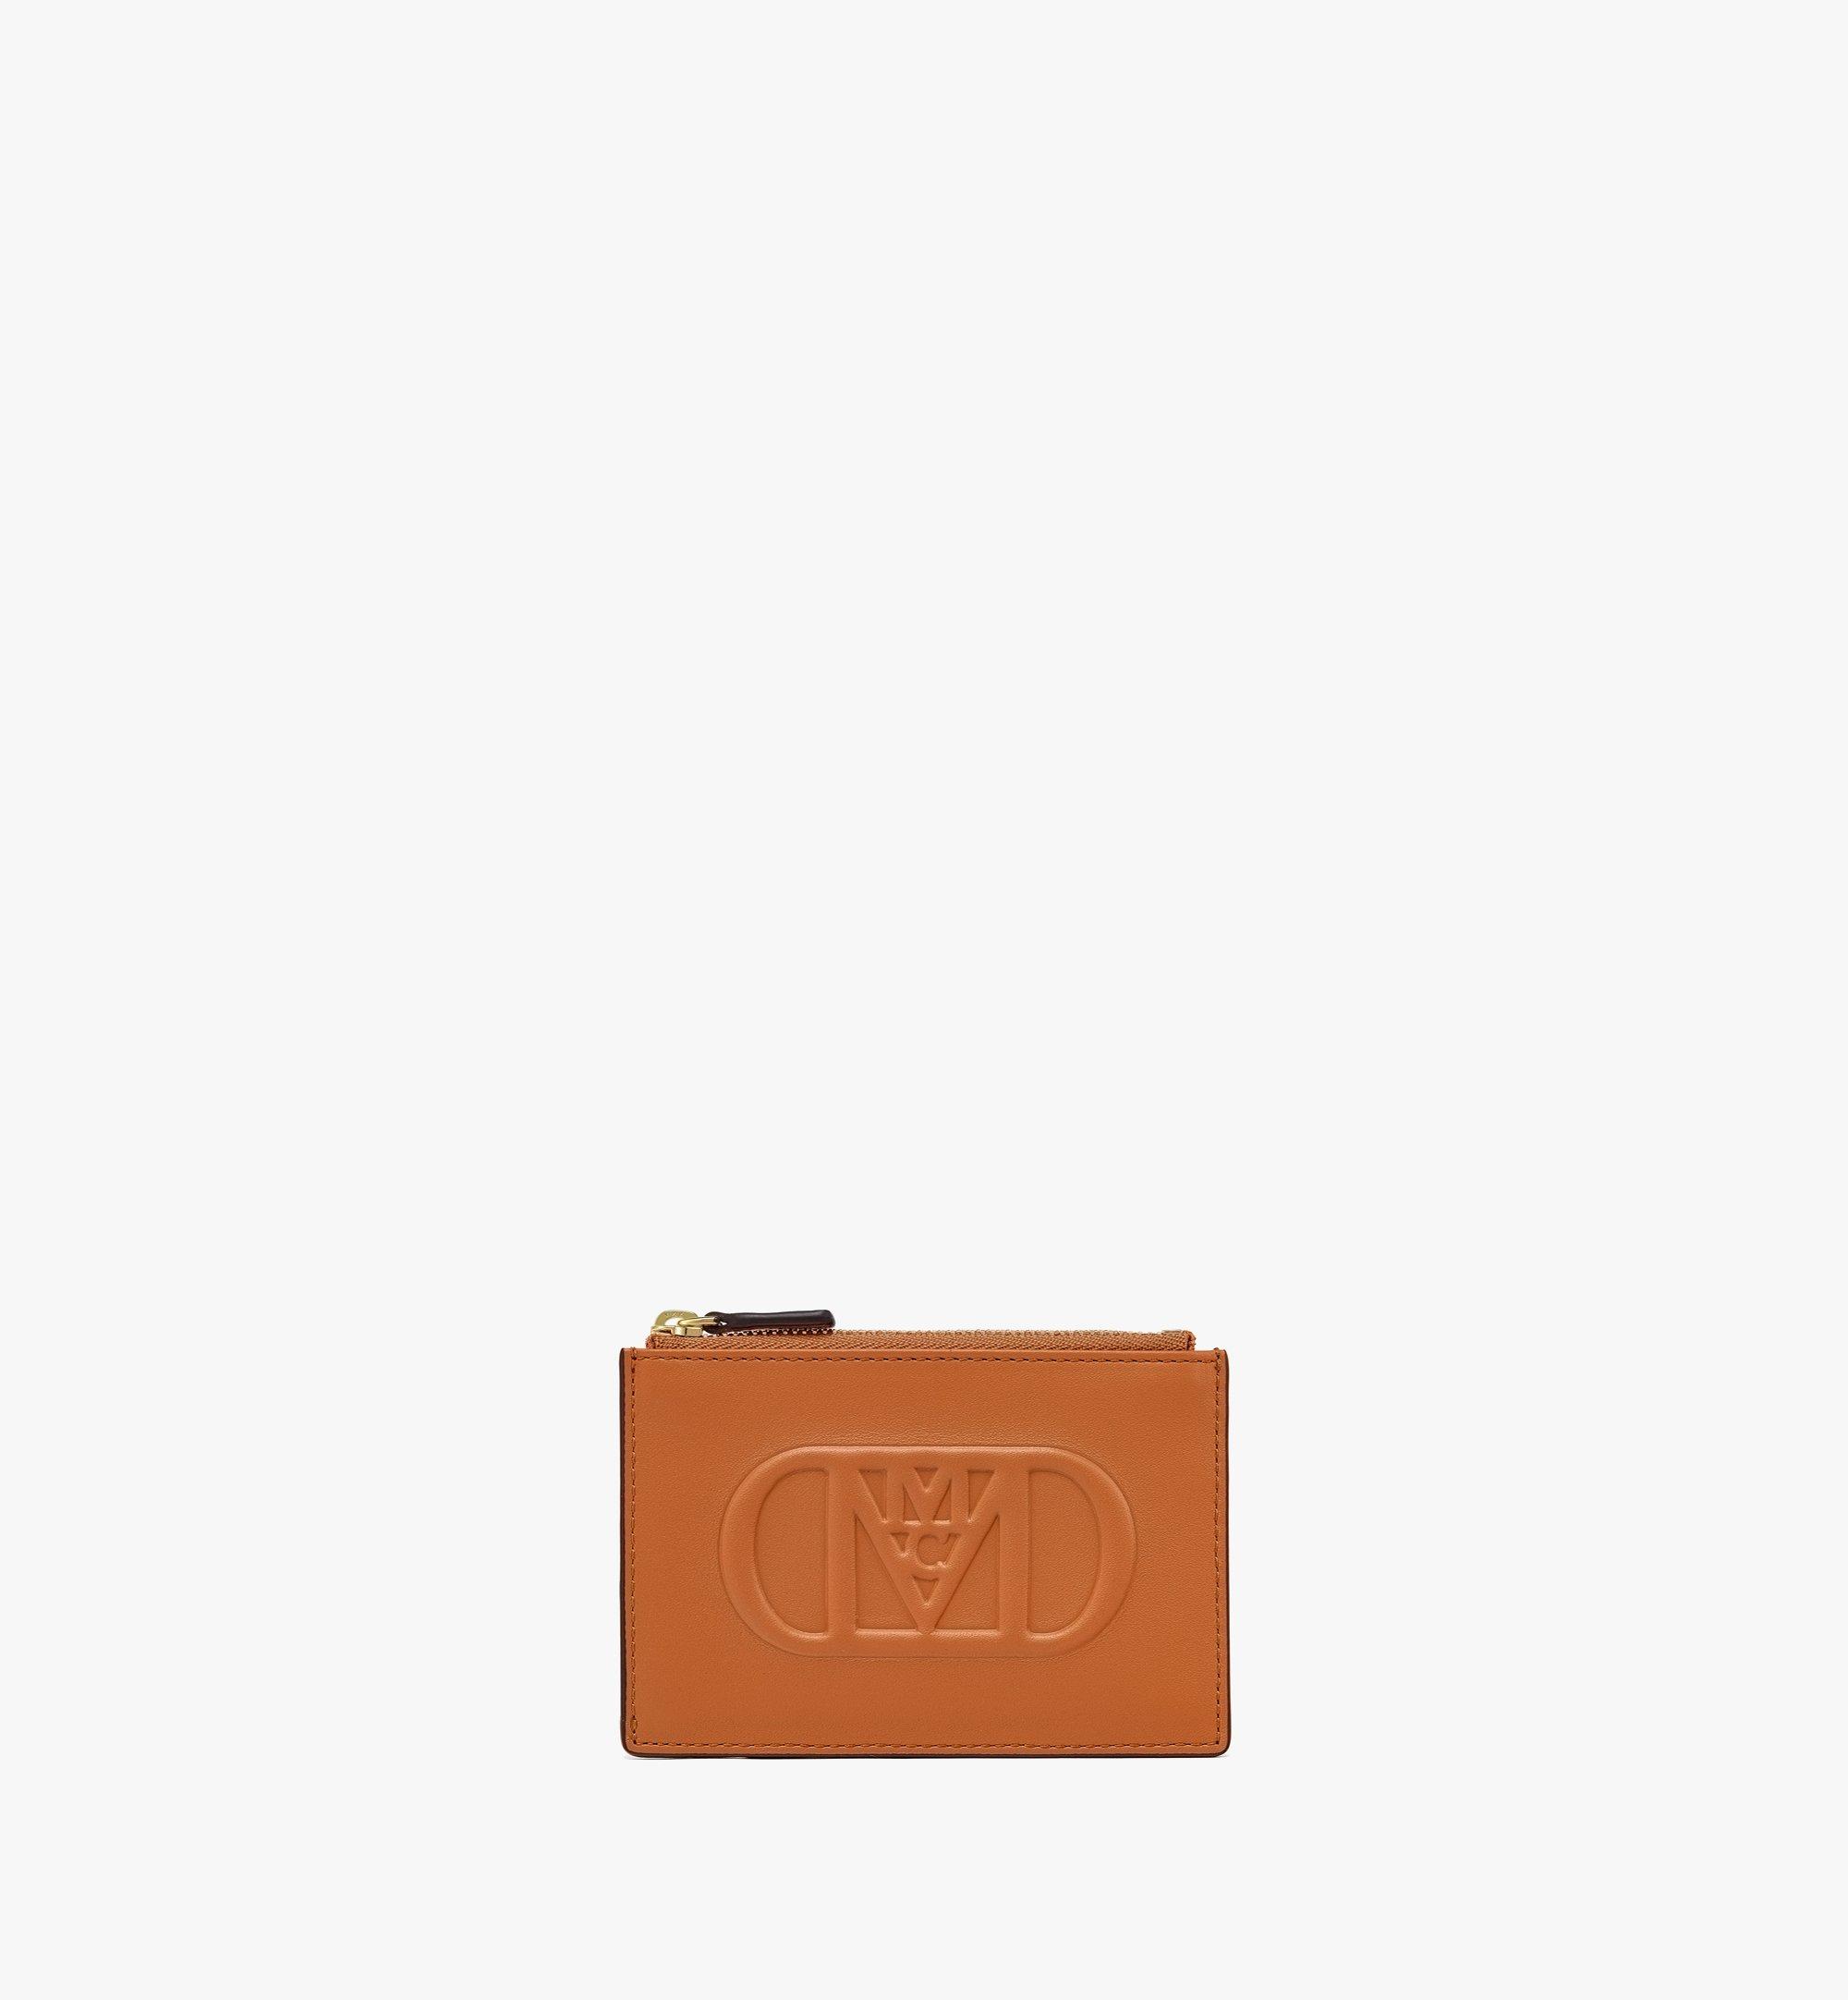 MCM Mode Travia Card Holder in Spanish Nappa Leather Cognac MYADSLD03CO001 Alternate View 1